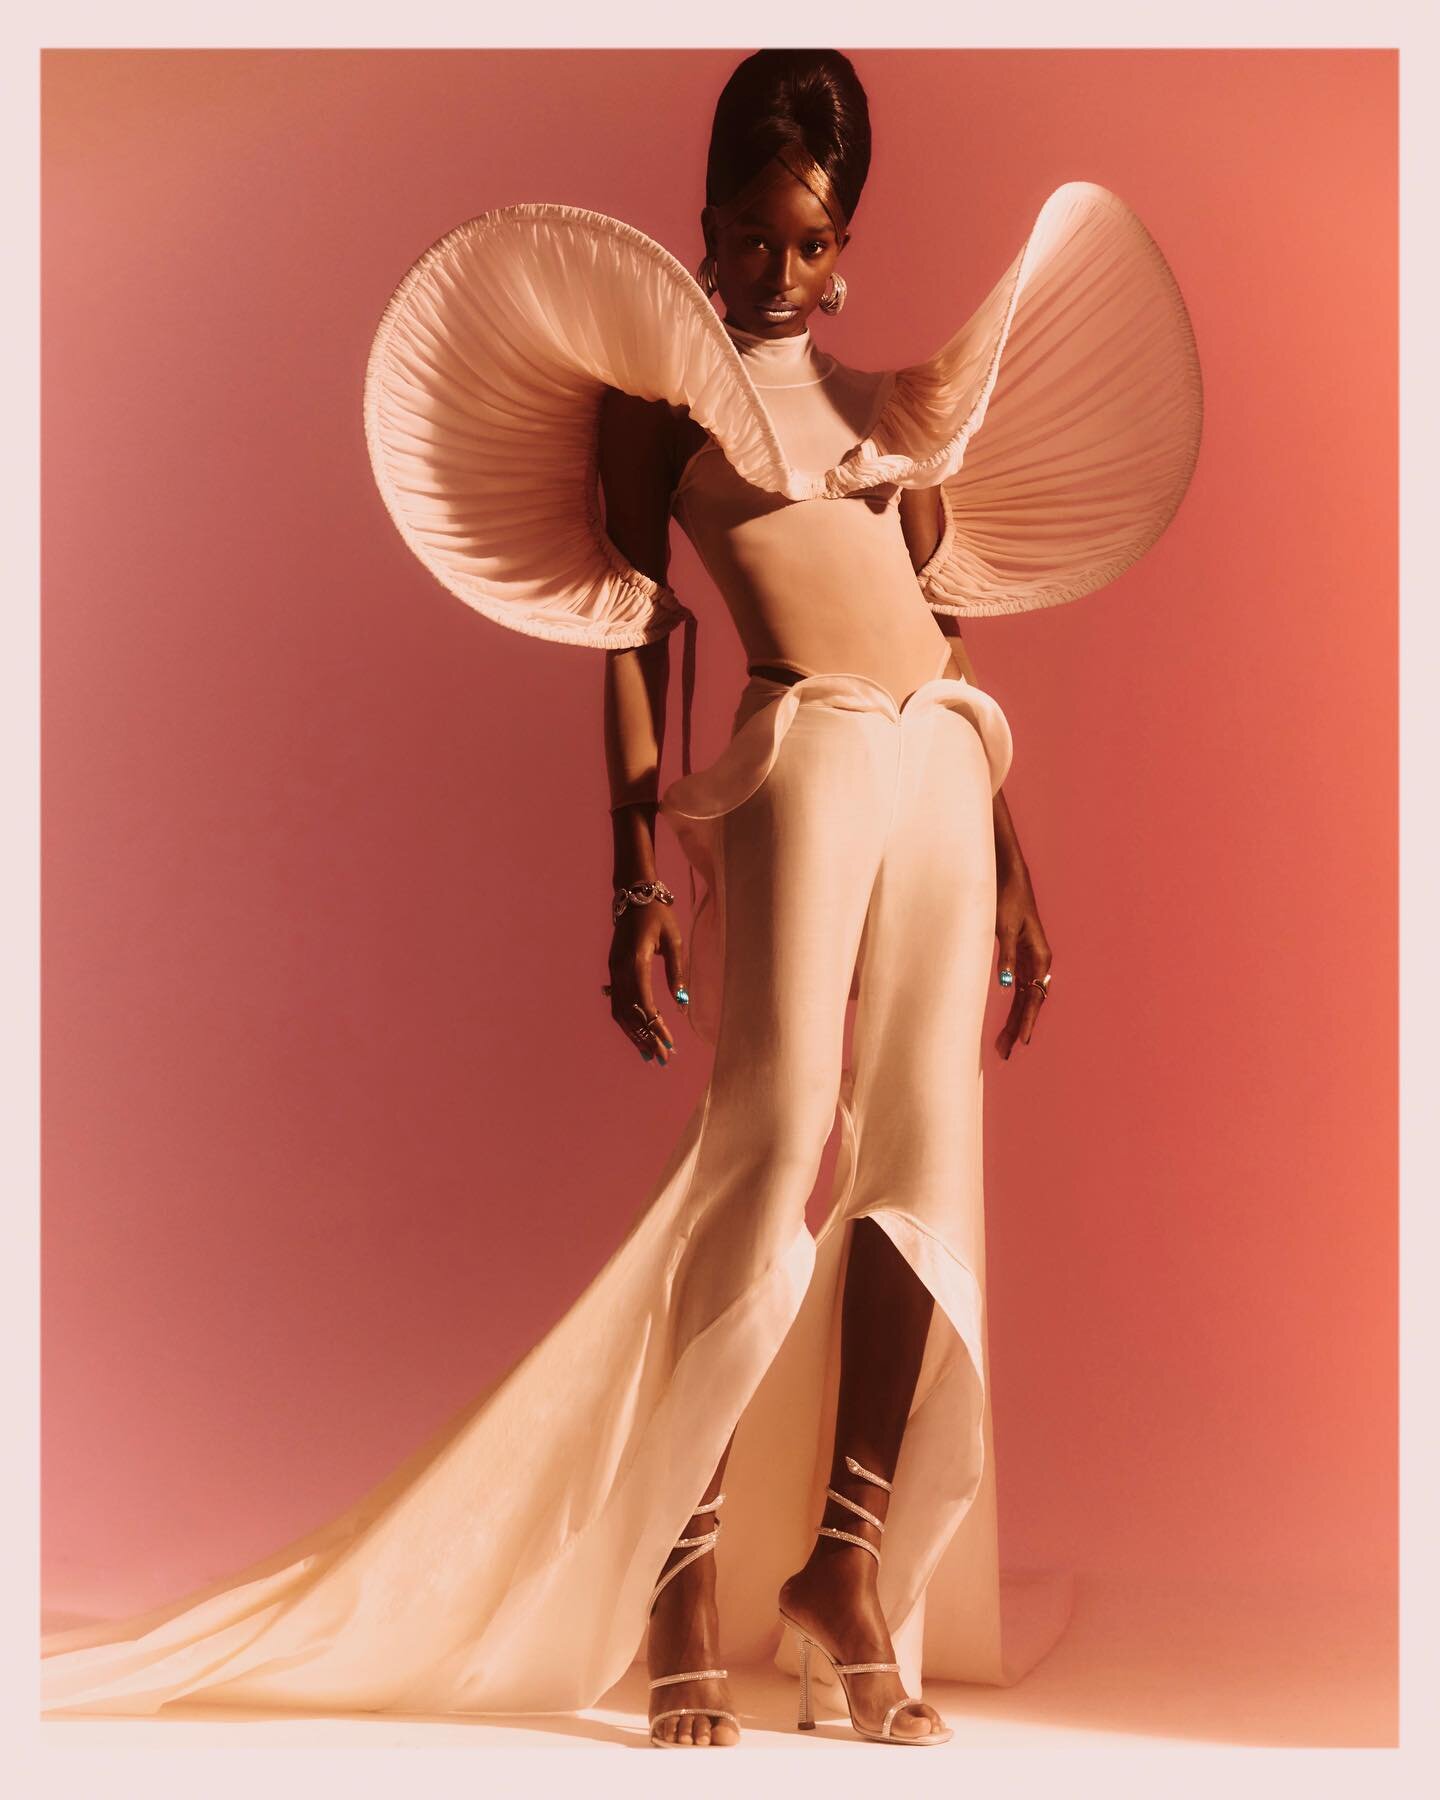 &ldquo;Angel 7 - Energy decadent description&ldquo;
for @wonderland styled by Toni Blaze 🐚🪸

Styling @toniblaze 
Styling Assistant @yascwilliams 
Photography @silipman 
Talent @f_aith_udoh from @thesquadmanagement